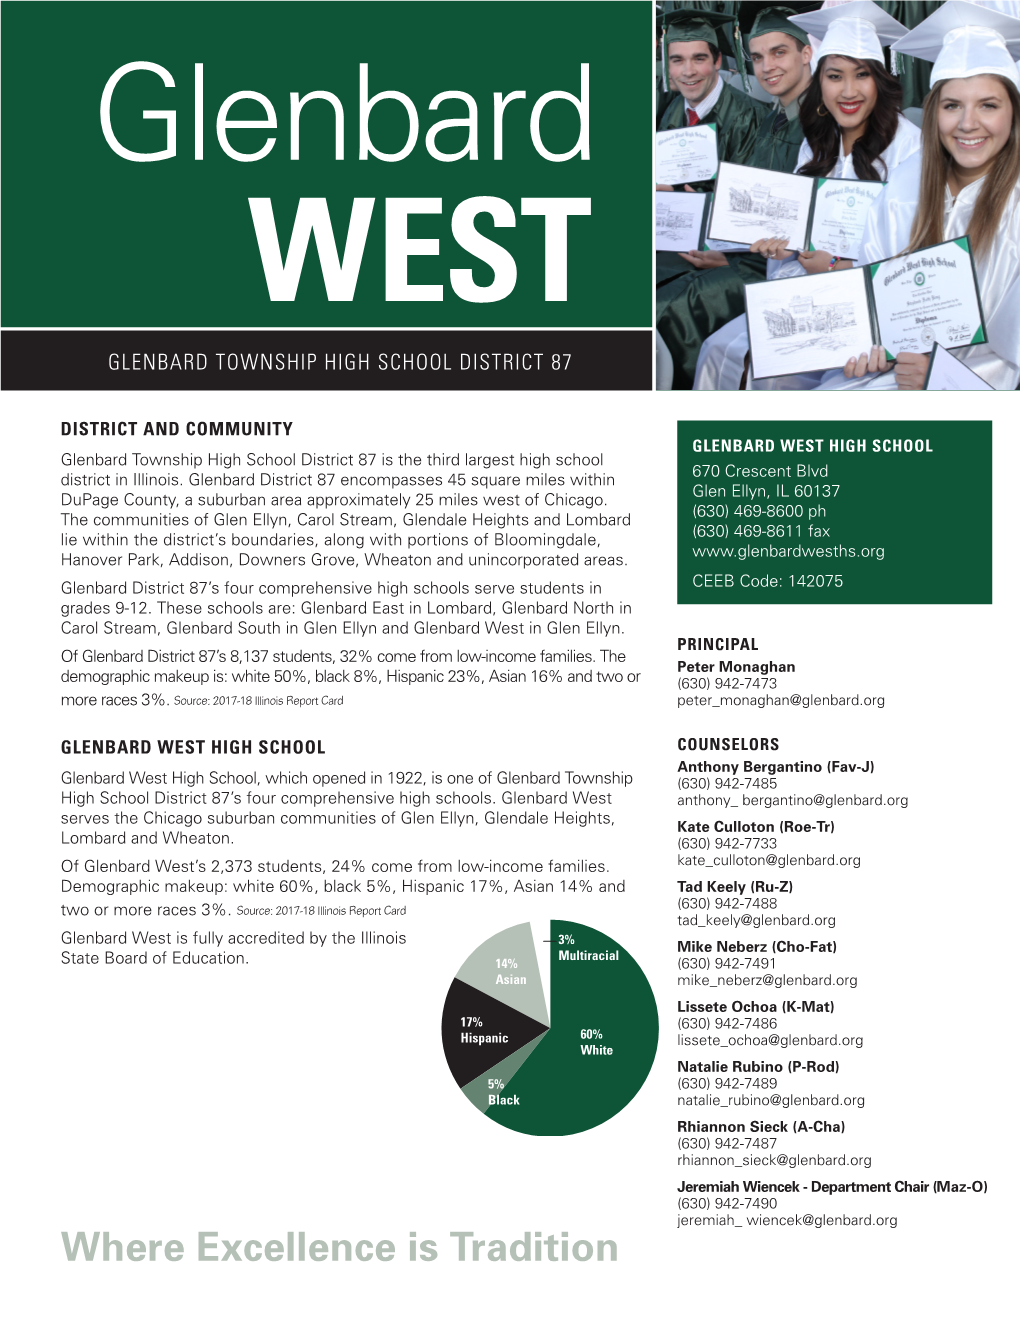 Where Excellence Is Tradition Glenbard WEST GLENBARD TOWNSHIP HIGH SCHOOL DISTRICT 87